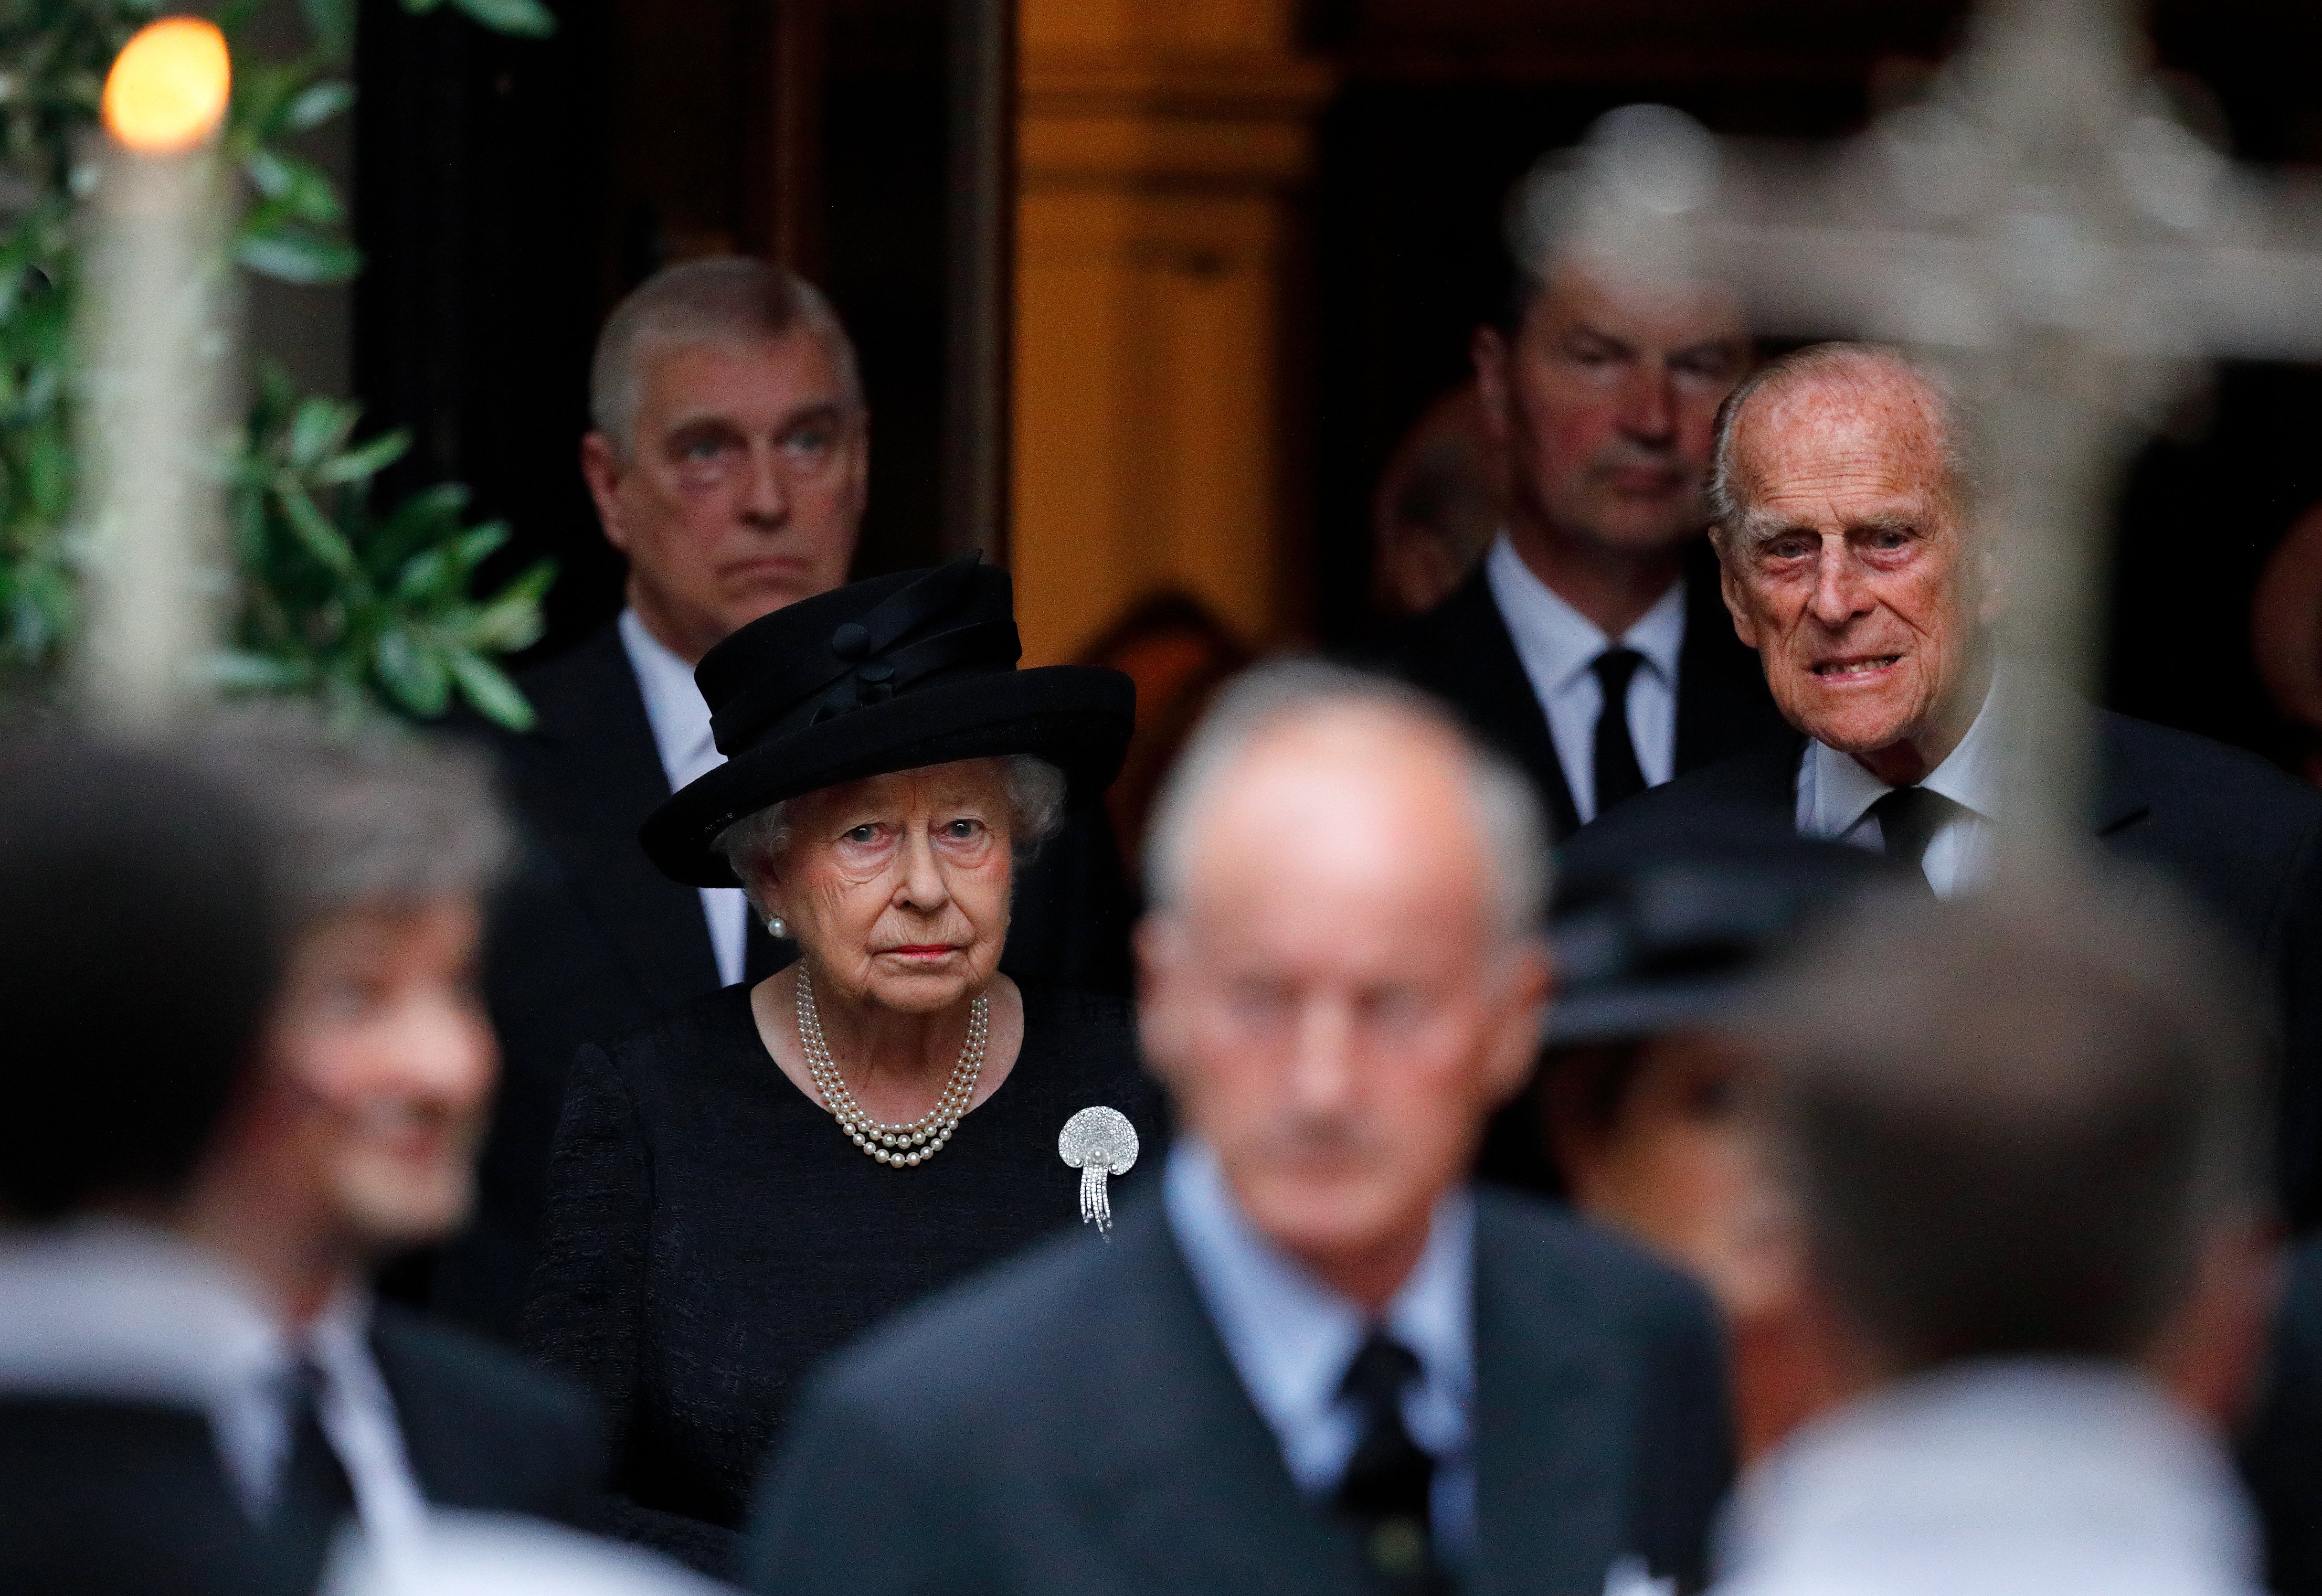 Queen Elizabeth II (wearing the Courtauld Thomson Scallop-Shell Brooch) and Prince Philip, Duke of Edinburgh at St Paul's Church, Knightsbridge on June 27, 2017 in London, England | Source: Getty Images